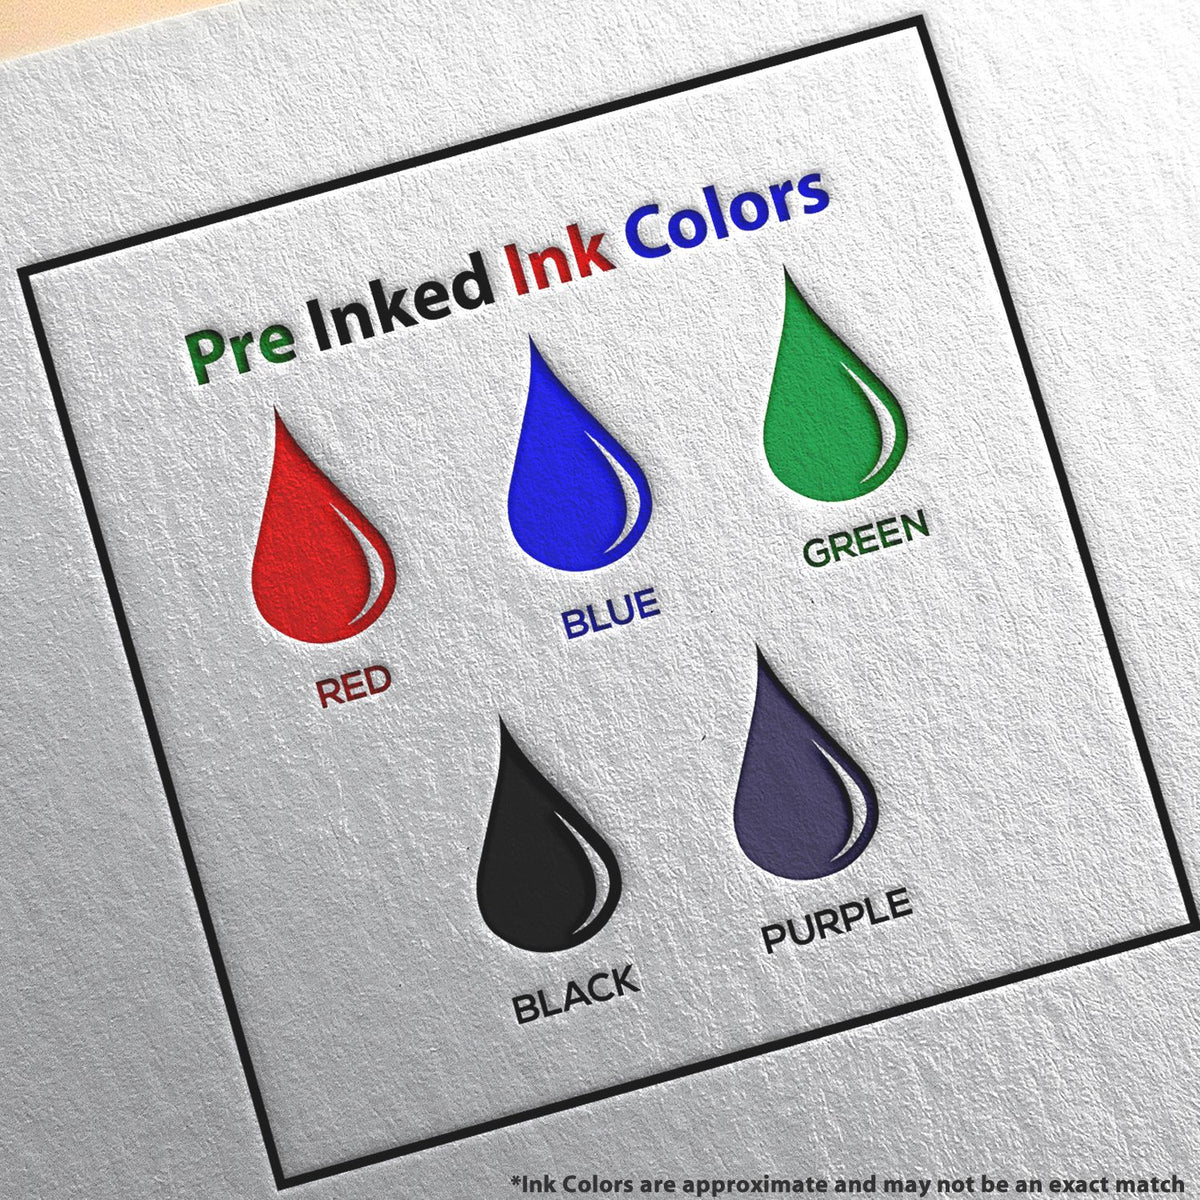 A picture showing the different ink colors or hues available for the PSI Guam Notary Stamp product.